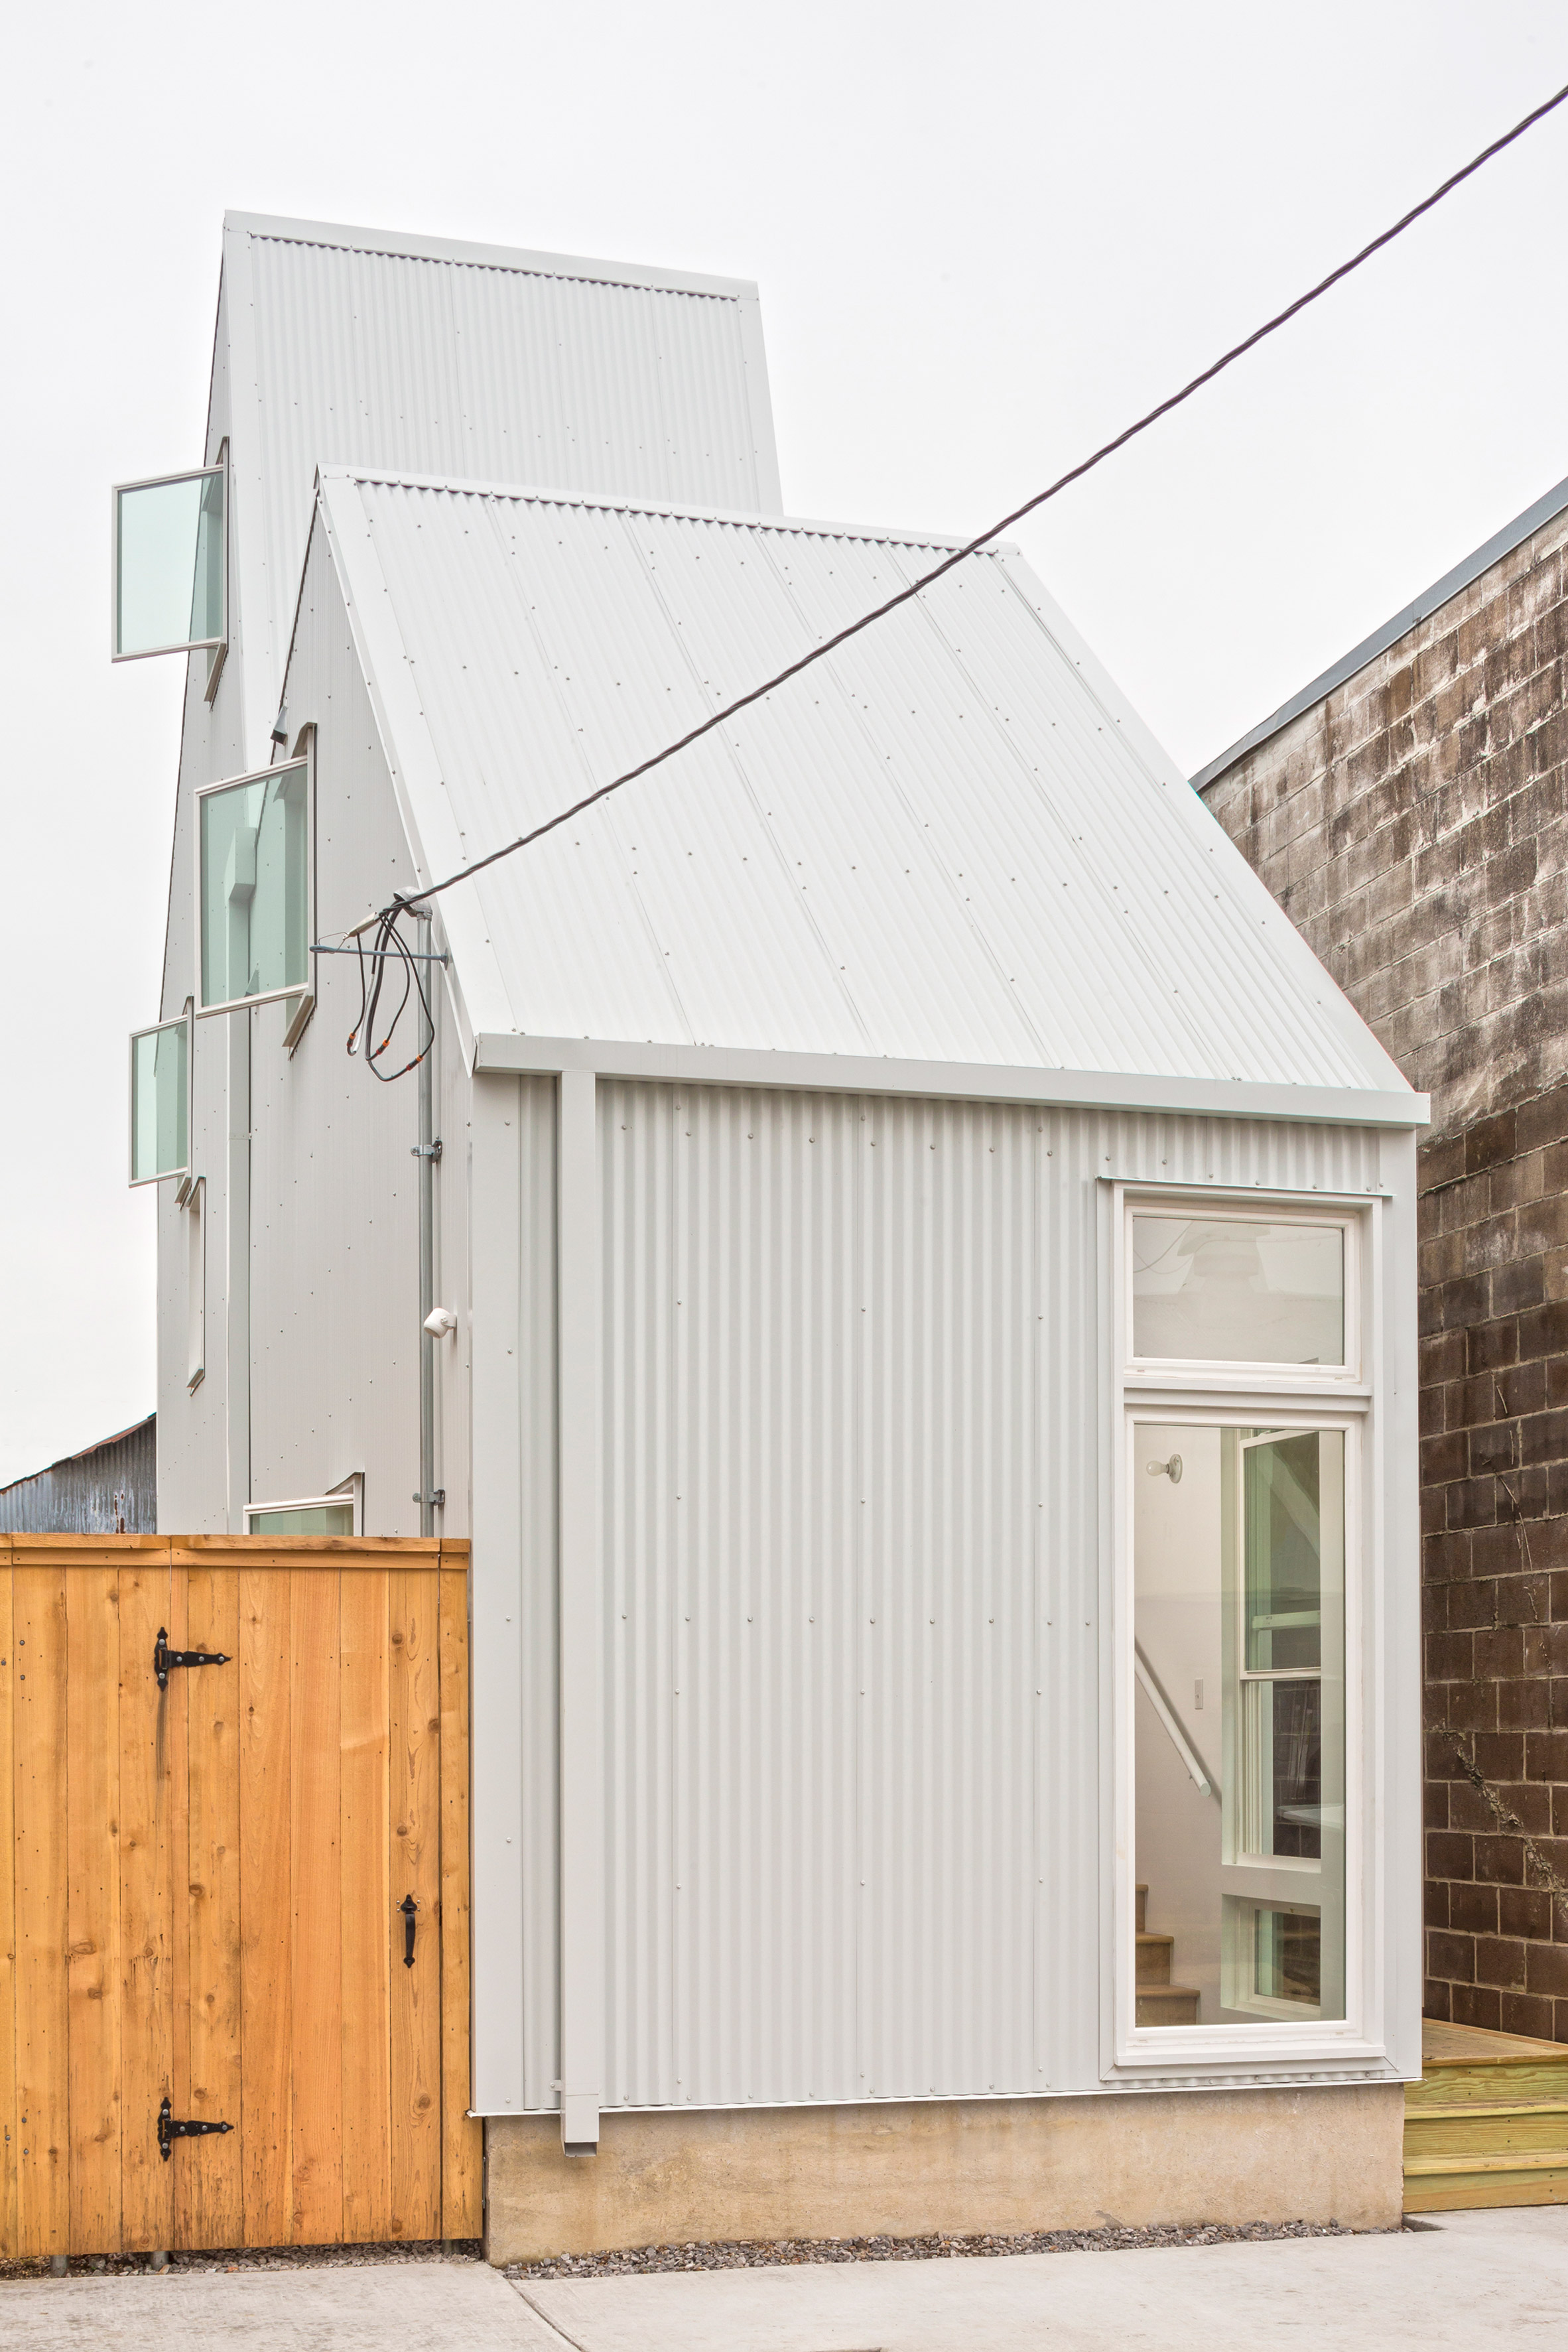 OJT creates compact "starter home" for skinny site in New Orleans